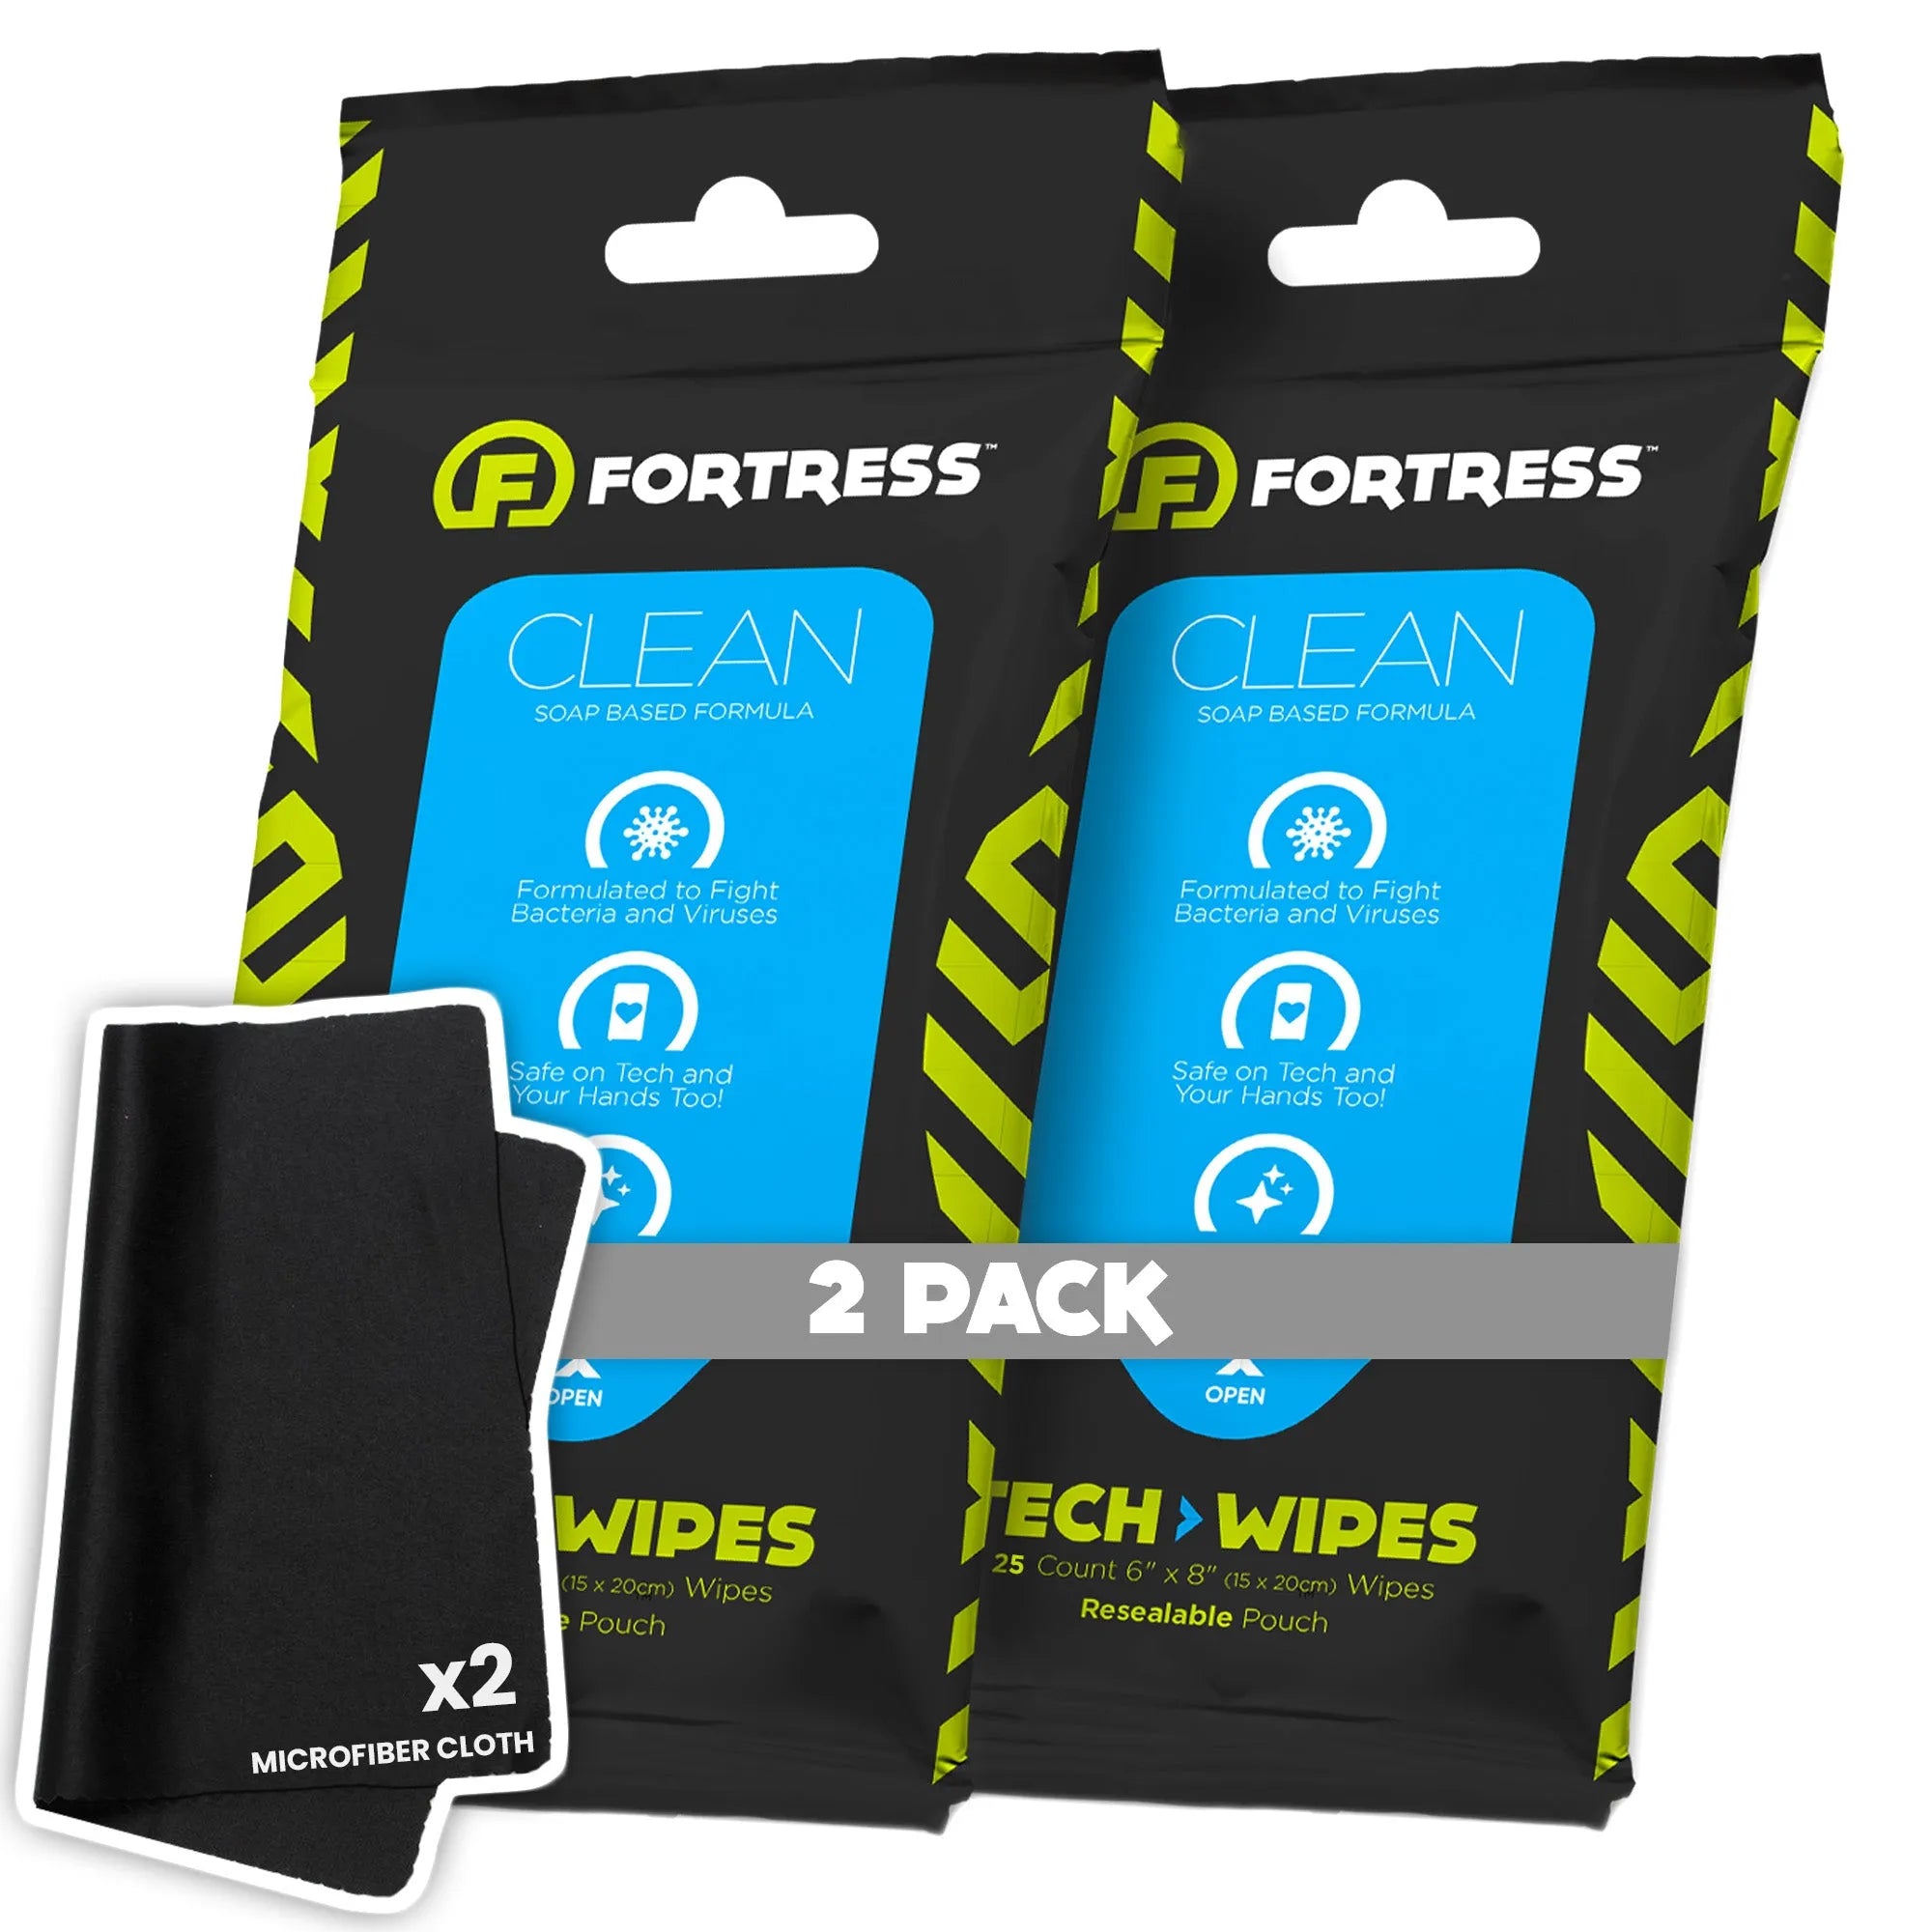 Fortress Tech Wipes (25 ct.) To-Go Disinfecting Wipes for Smartphones 2-PackYes Scooch Clean